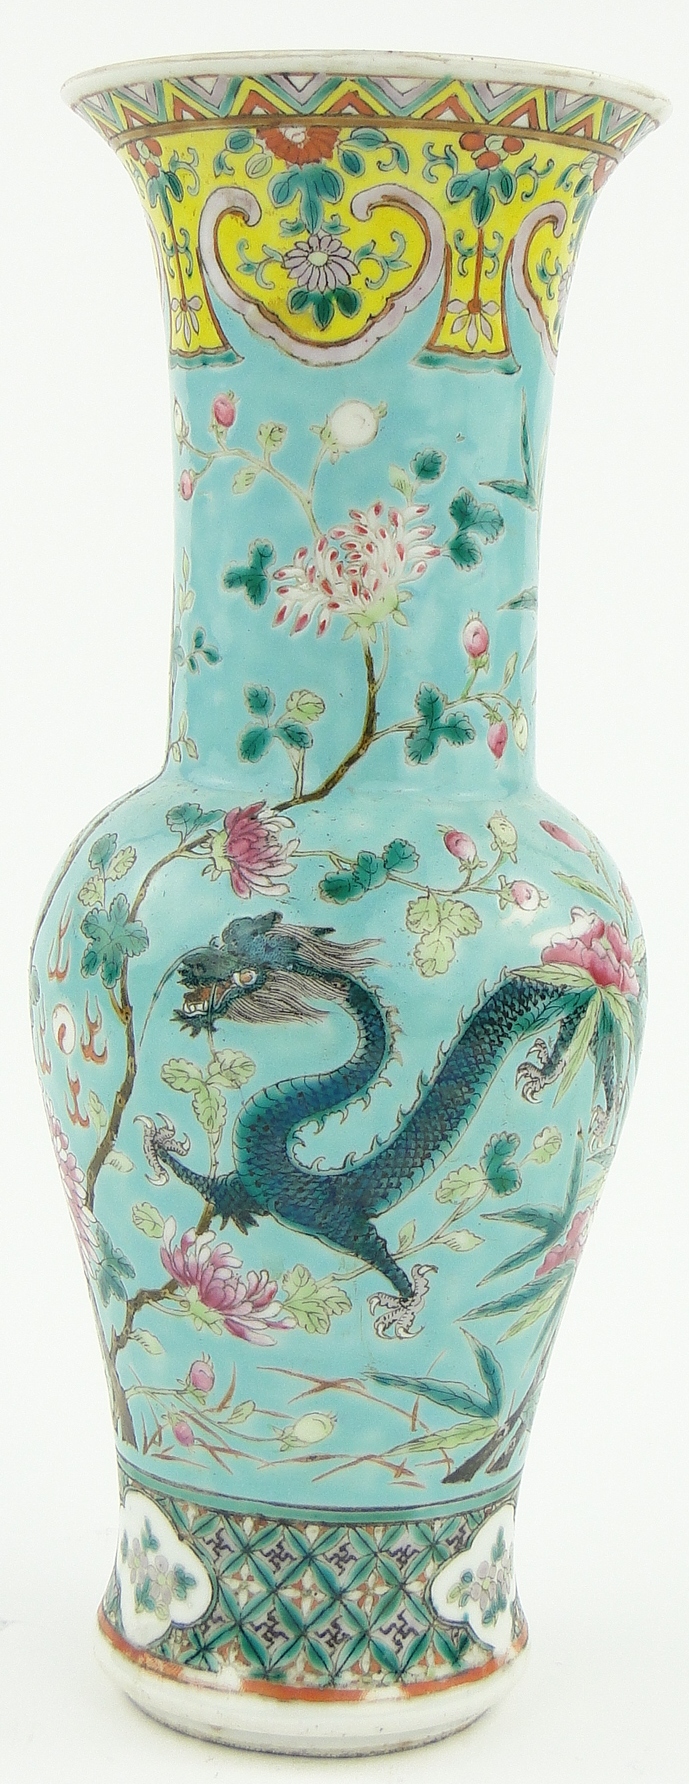 A Chinese vase
with dragon design on turquoise ground, 12".